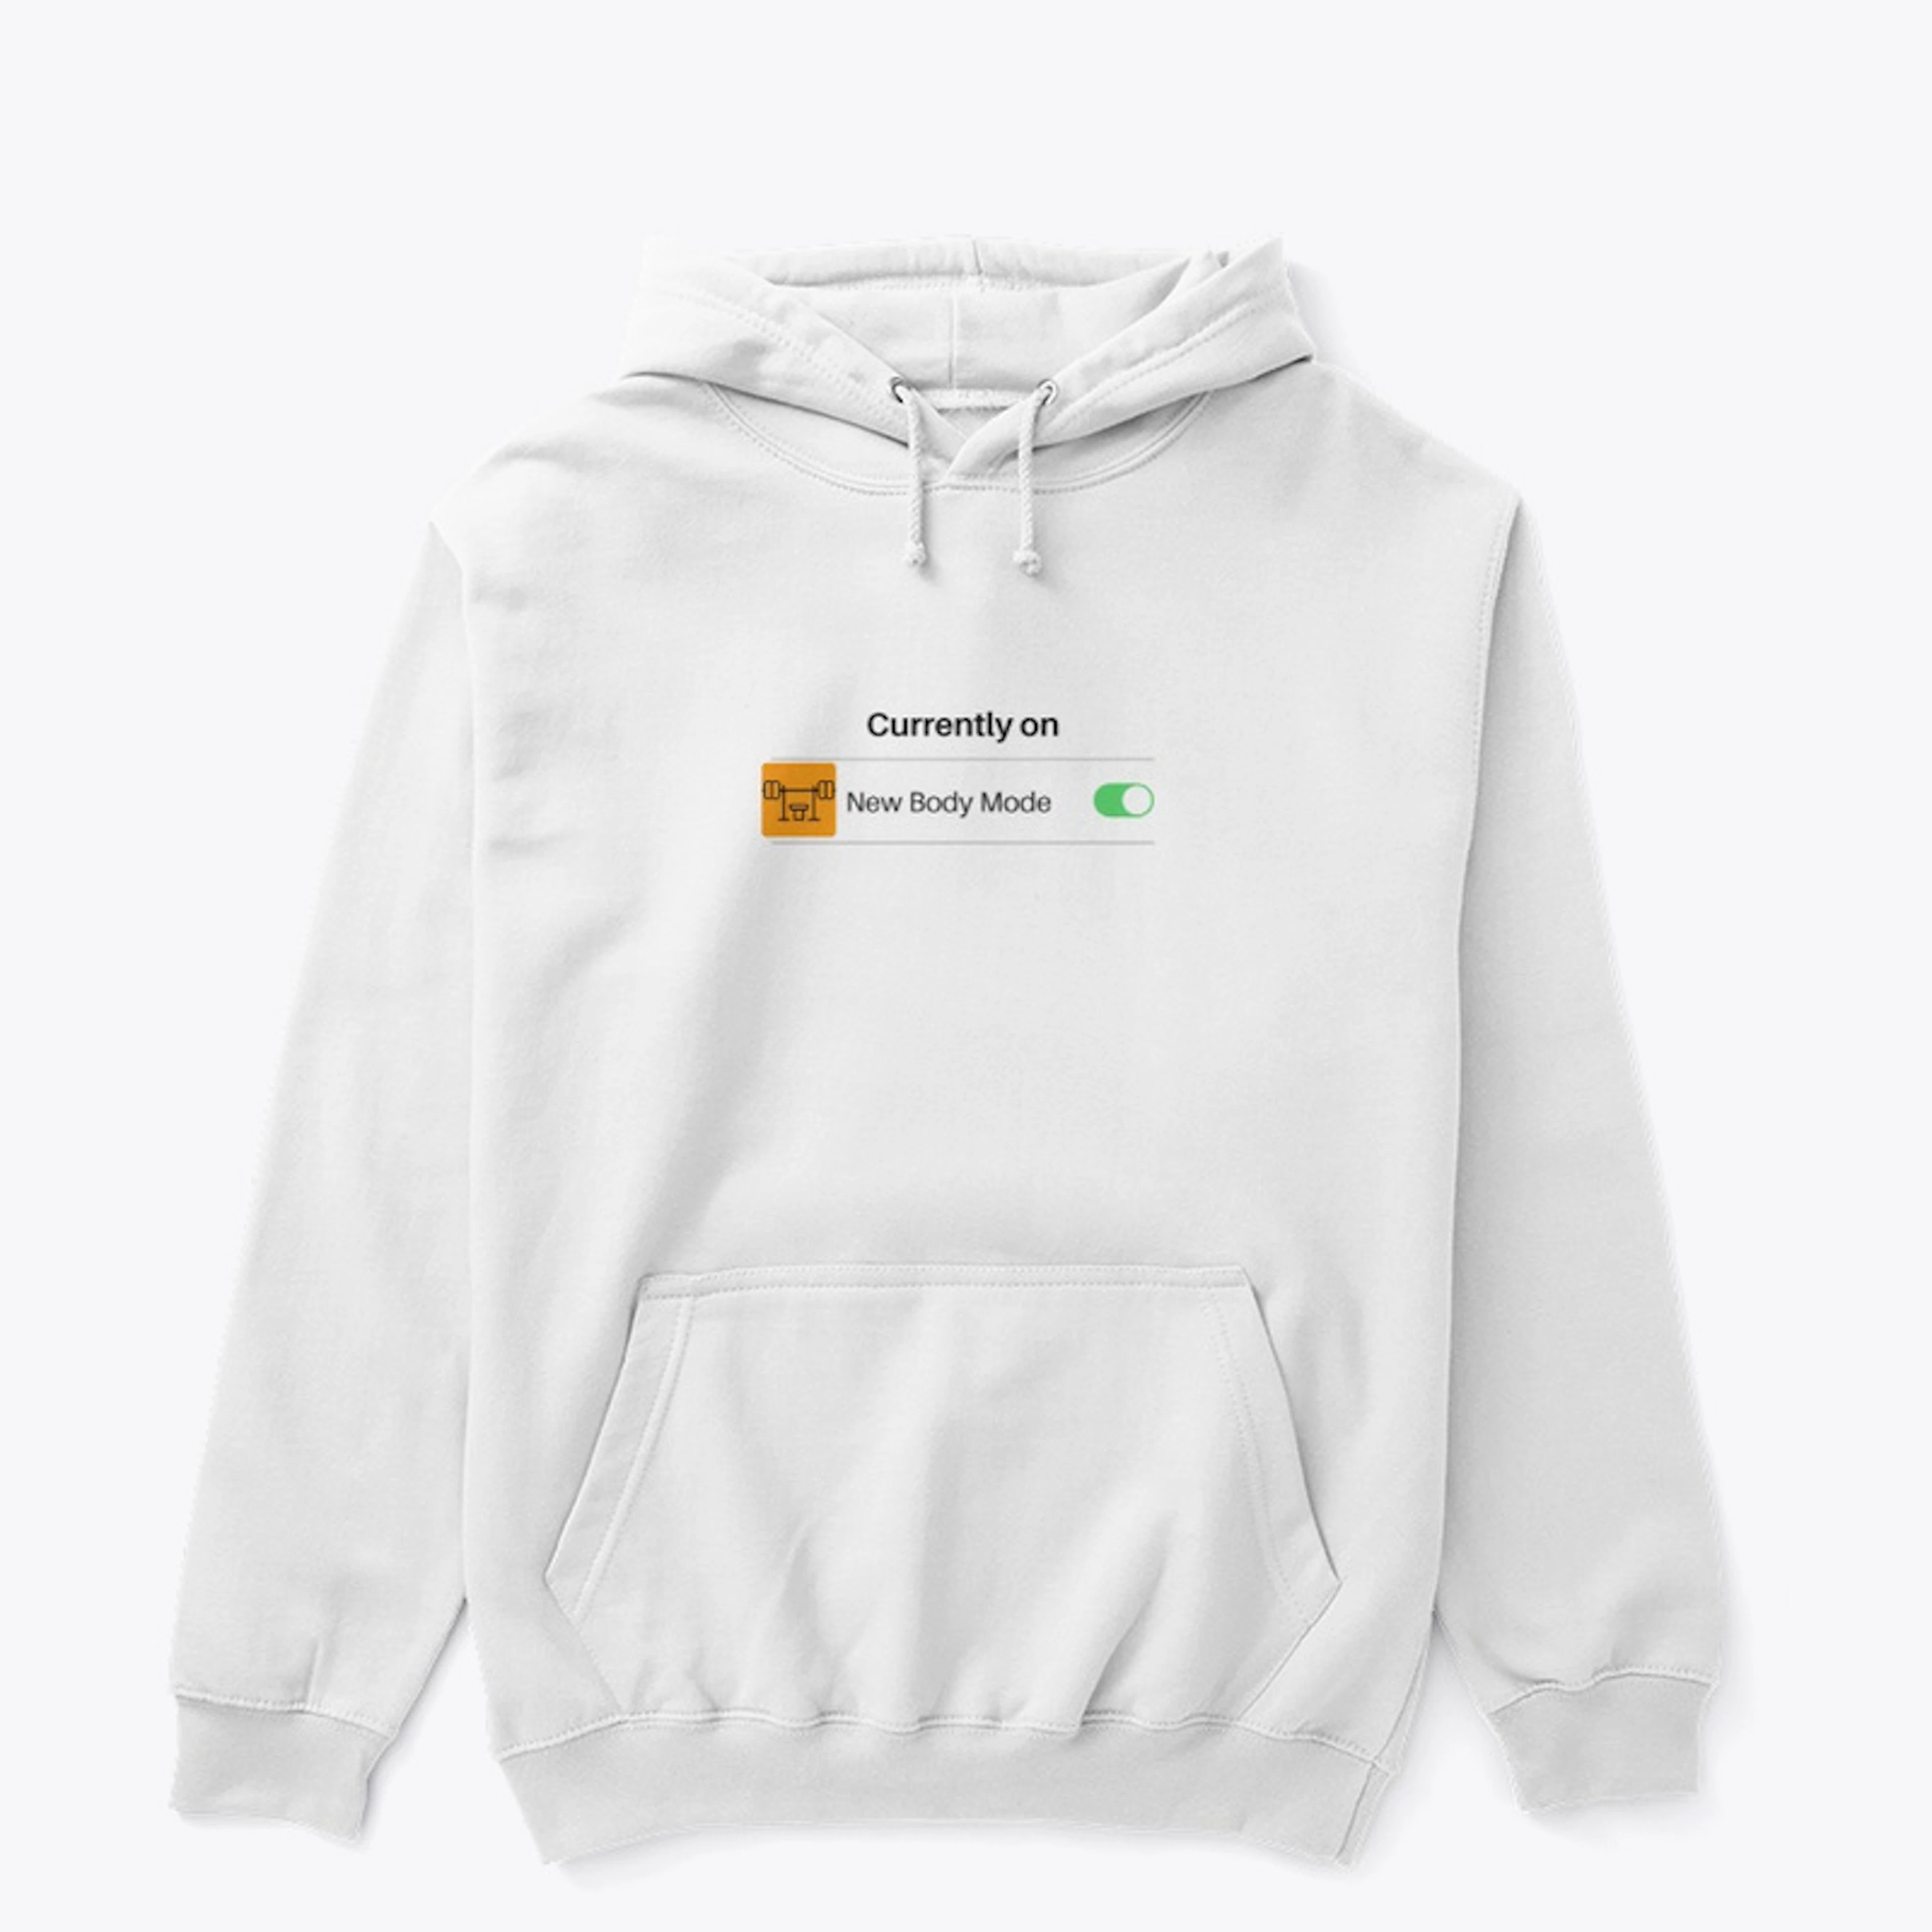 New Body Mode T-shirt or Hoodie 